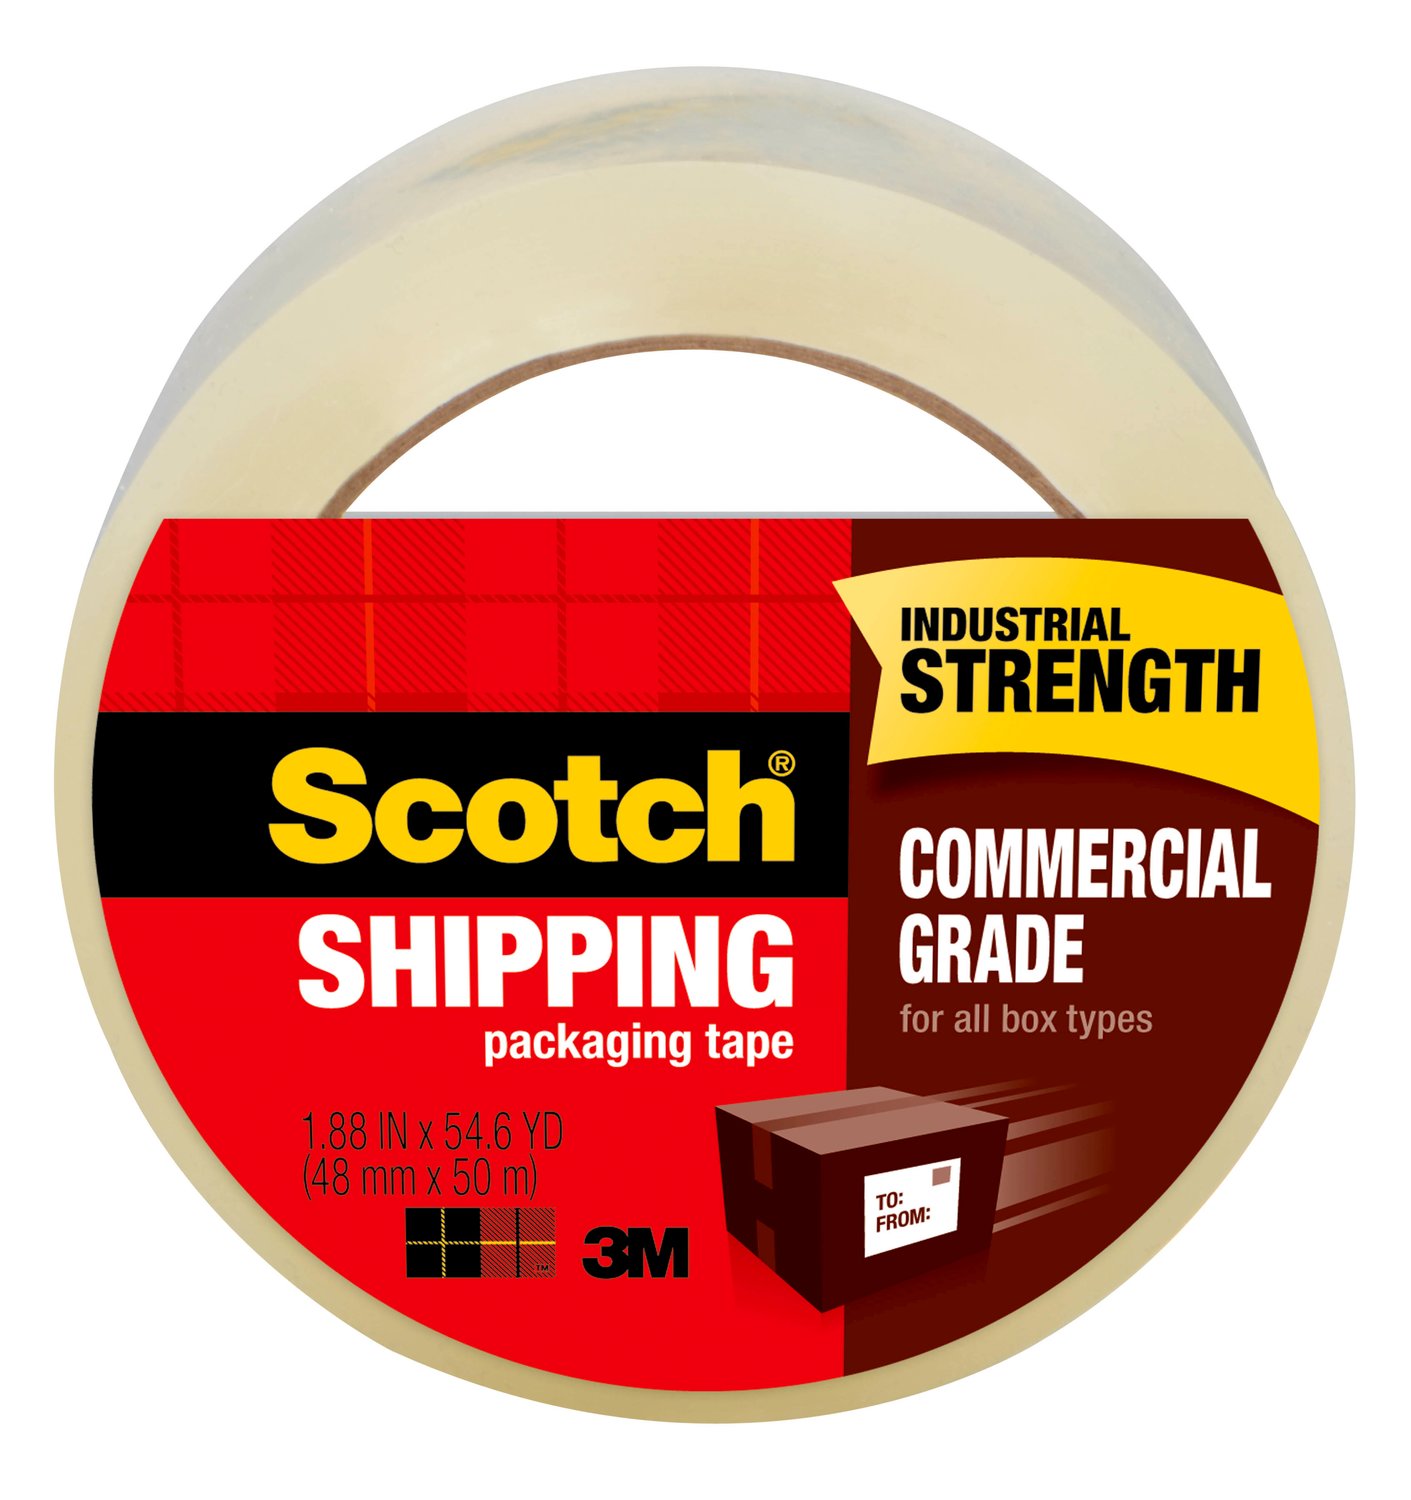 7100282629 - Scotch Commercial Grade Shipping Packaging Tape 3750-CS36ST, 1.88 in x 54.6 yd (48 mm x 50 m), Case Value Pack